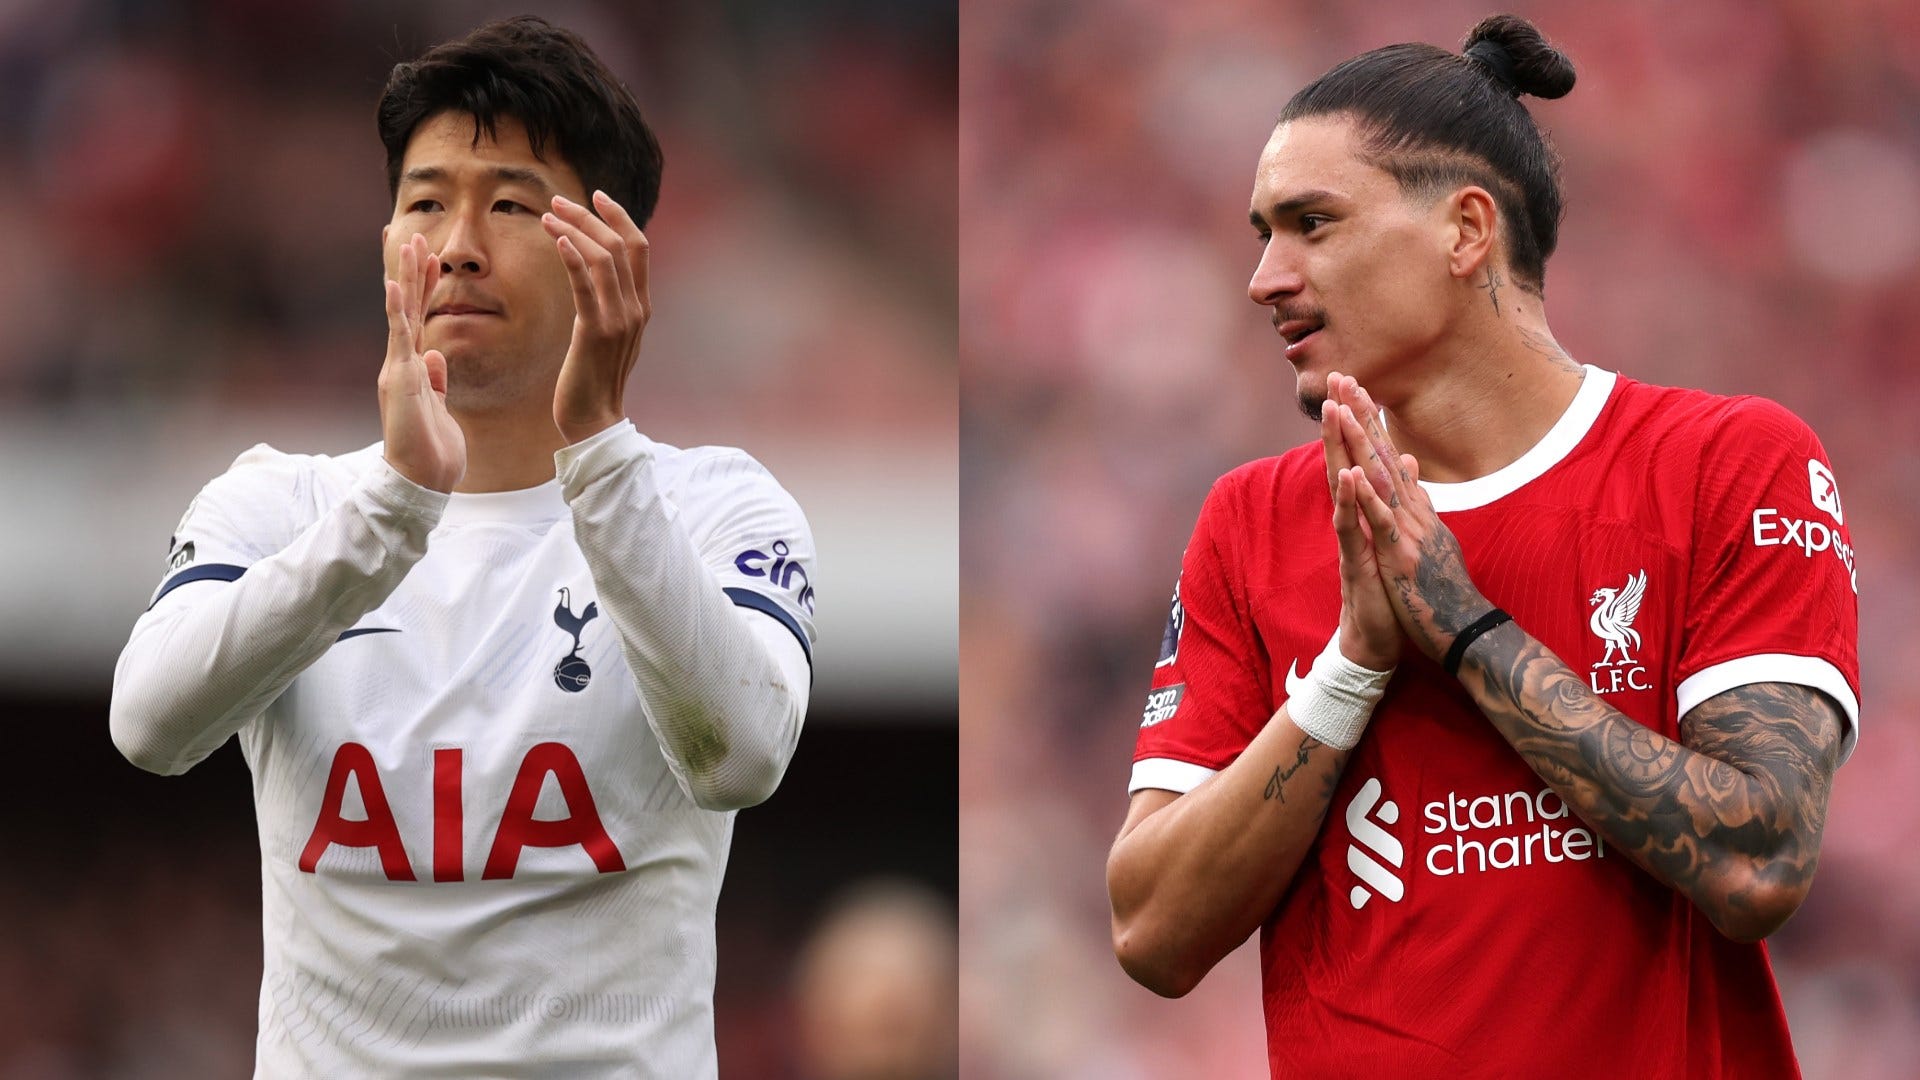 Tottenham vs Liverpool Live stream, TV channel, kick-off time and where to watch Goal US